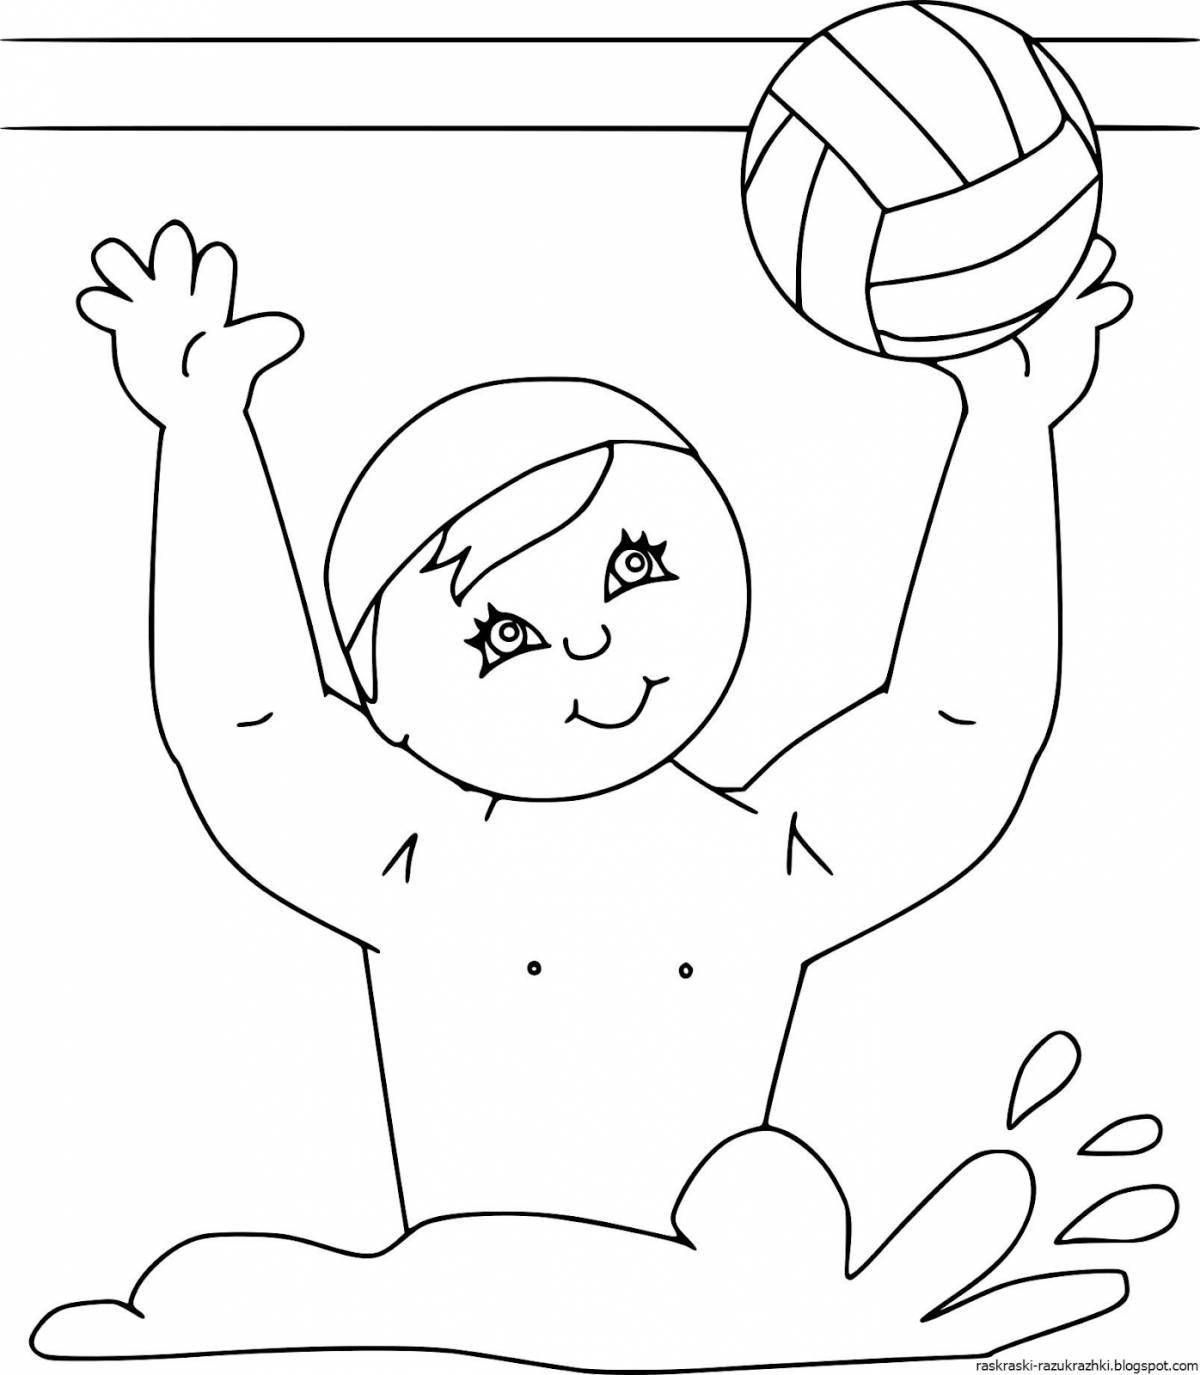 Impressive sports coloring book for 3-4 year olds